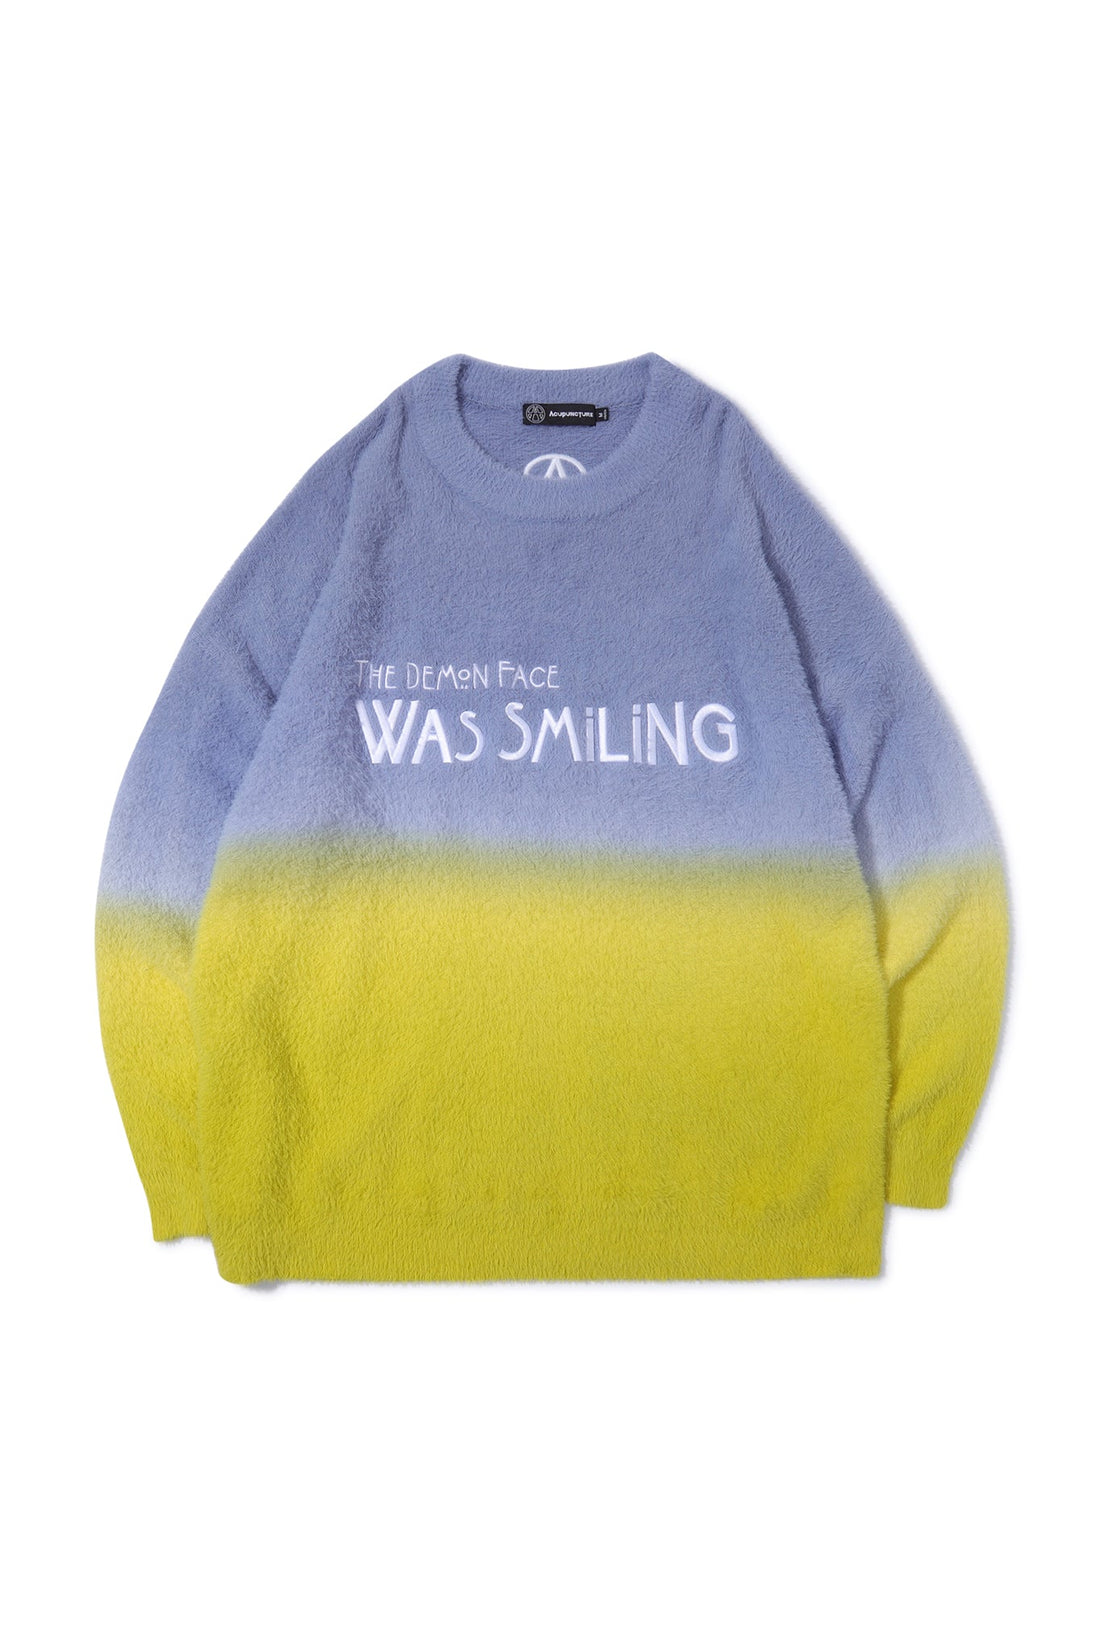 MOTTO SWEATER BLUE/YELLOW Acupuncture